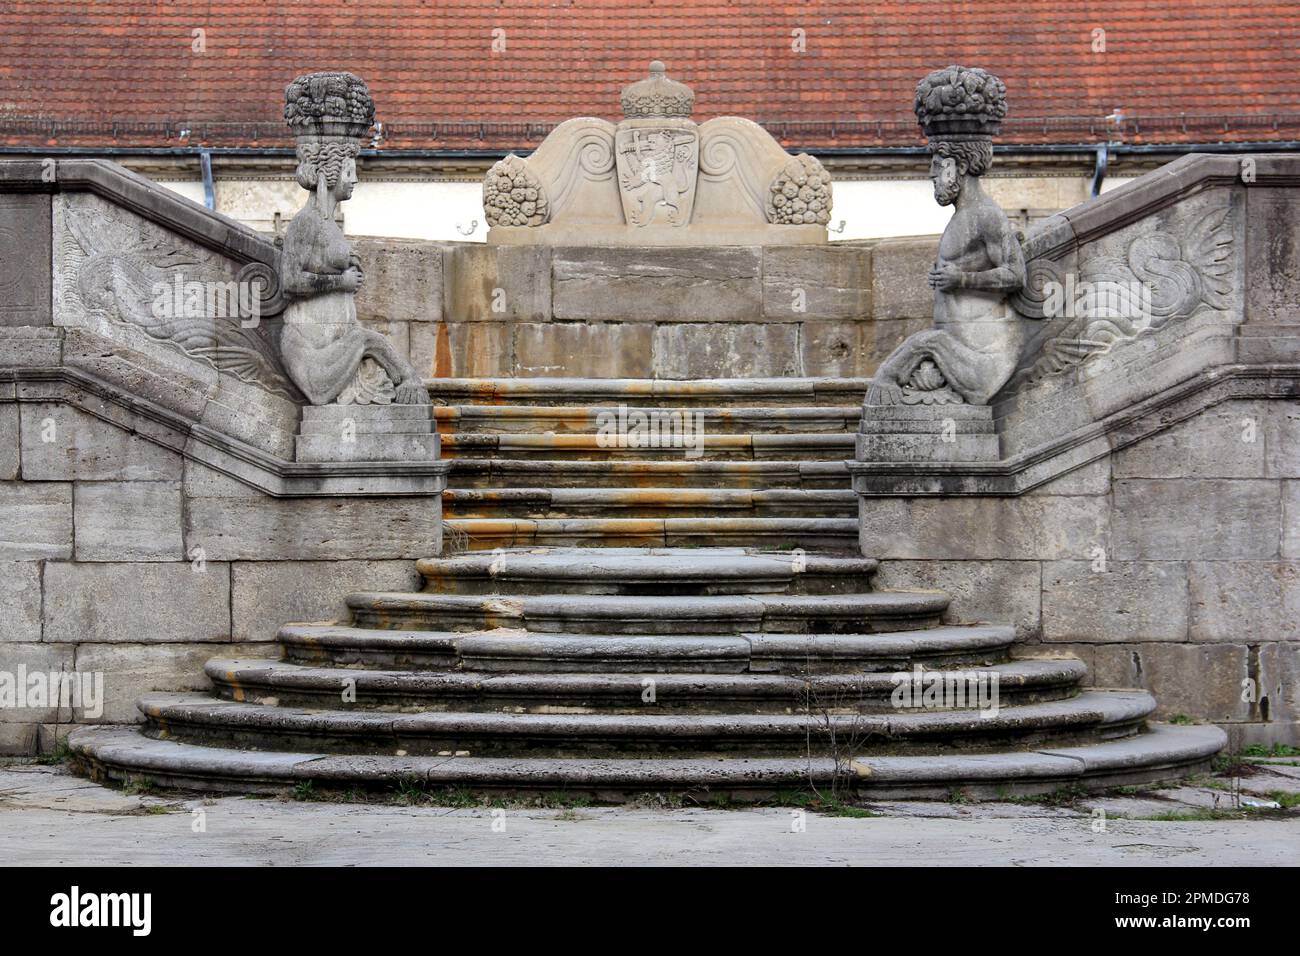 Jugendstil sculptural and stone-carved decorations of the fountain, at the Sprudelhof, mineral waters spa complex, Bad Nauhaim, Germany Stock Photo